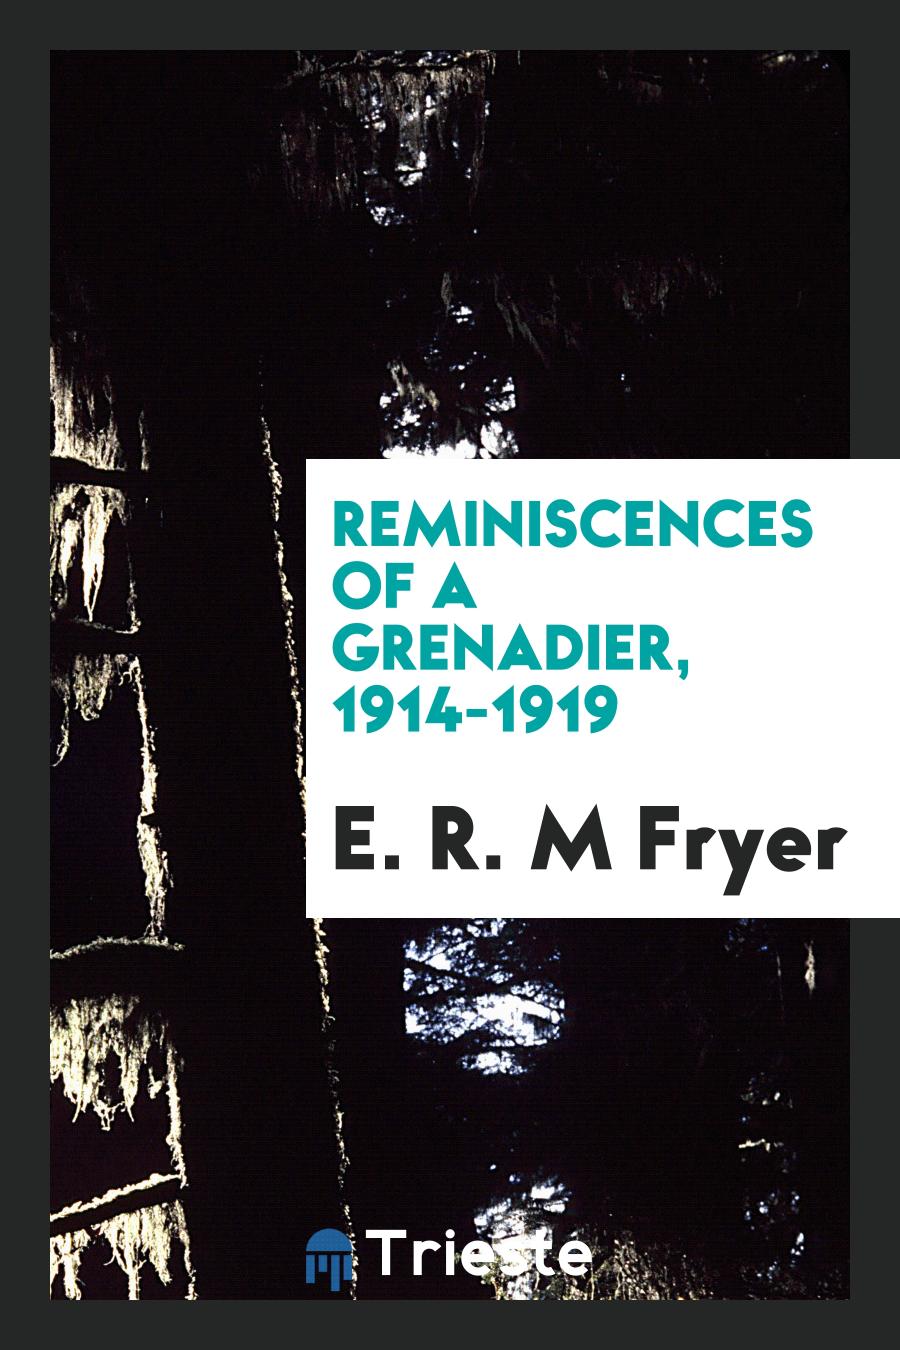 Reminiscences of a Grenadier, 1914-1919